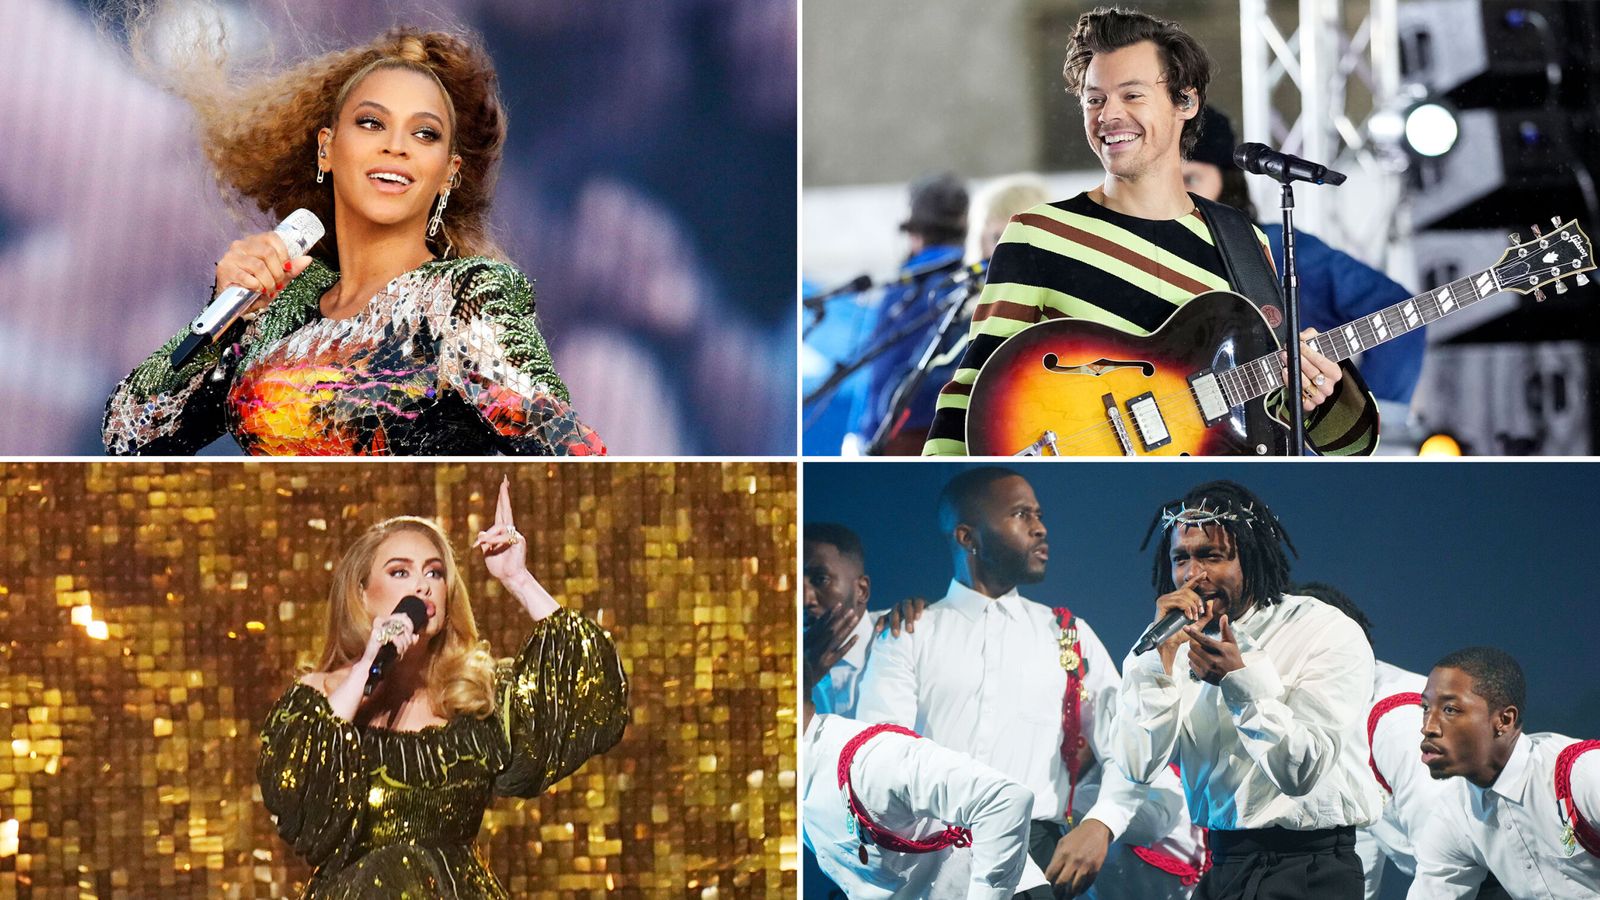 Grammy Awards 2023: Five things to look out for on music's biggest night